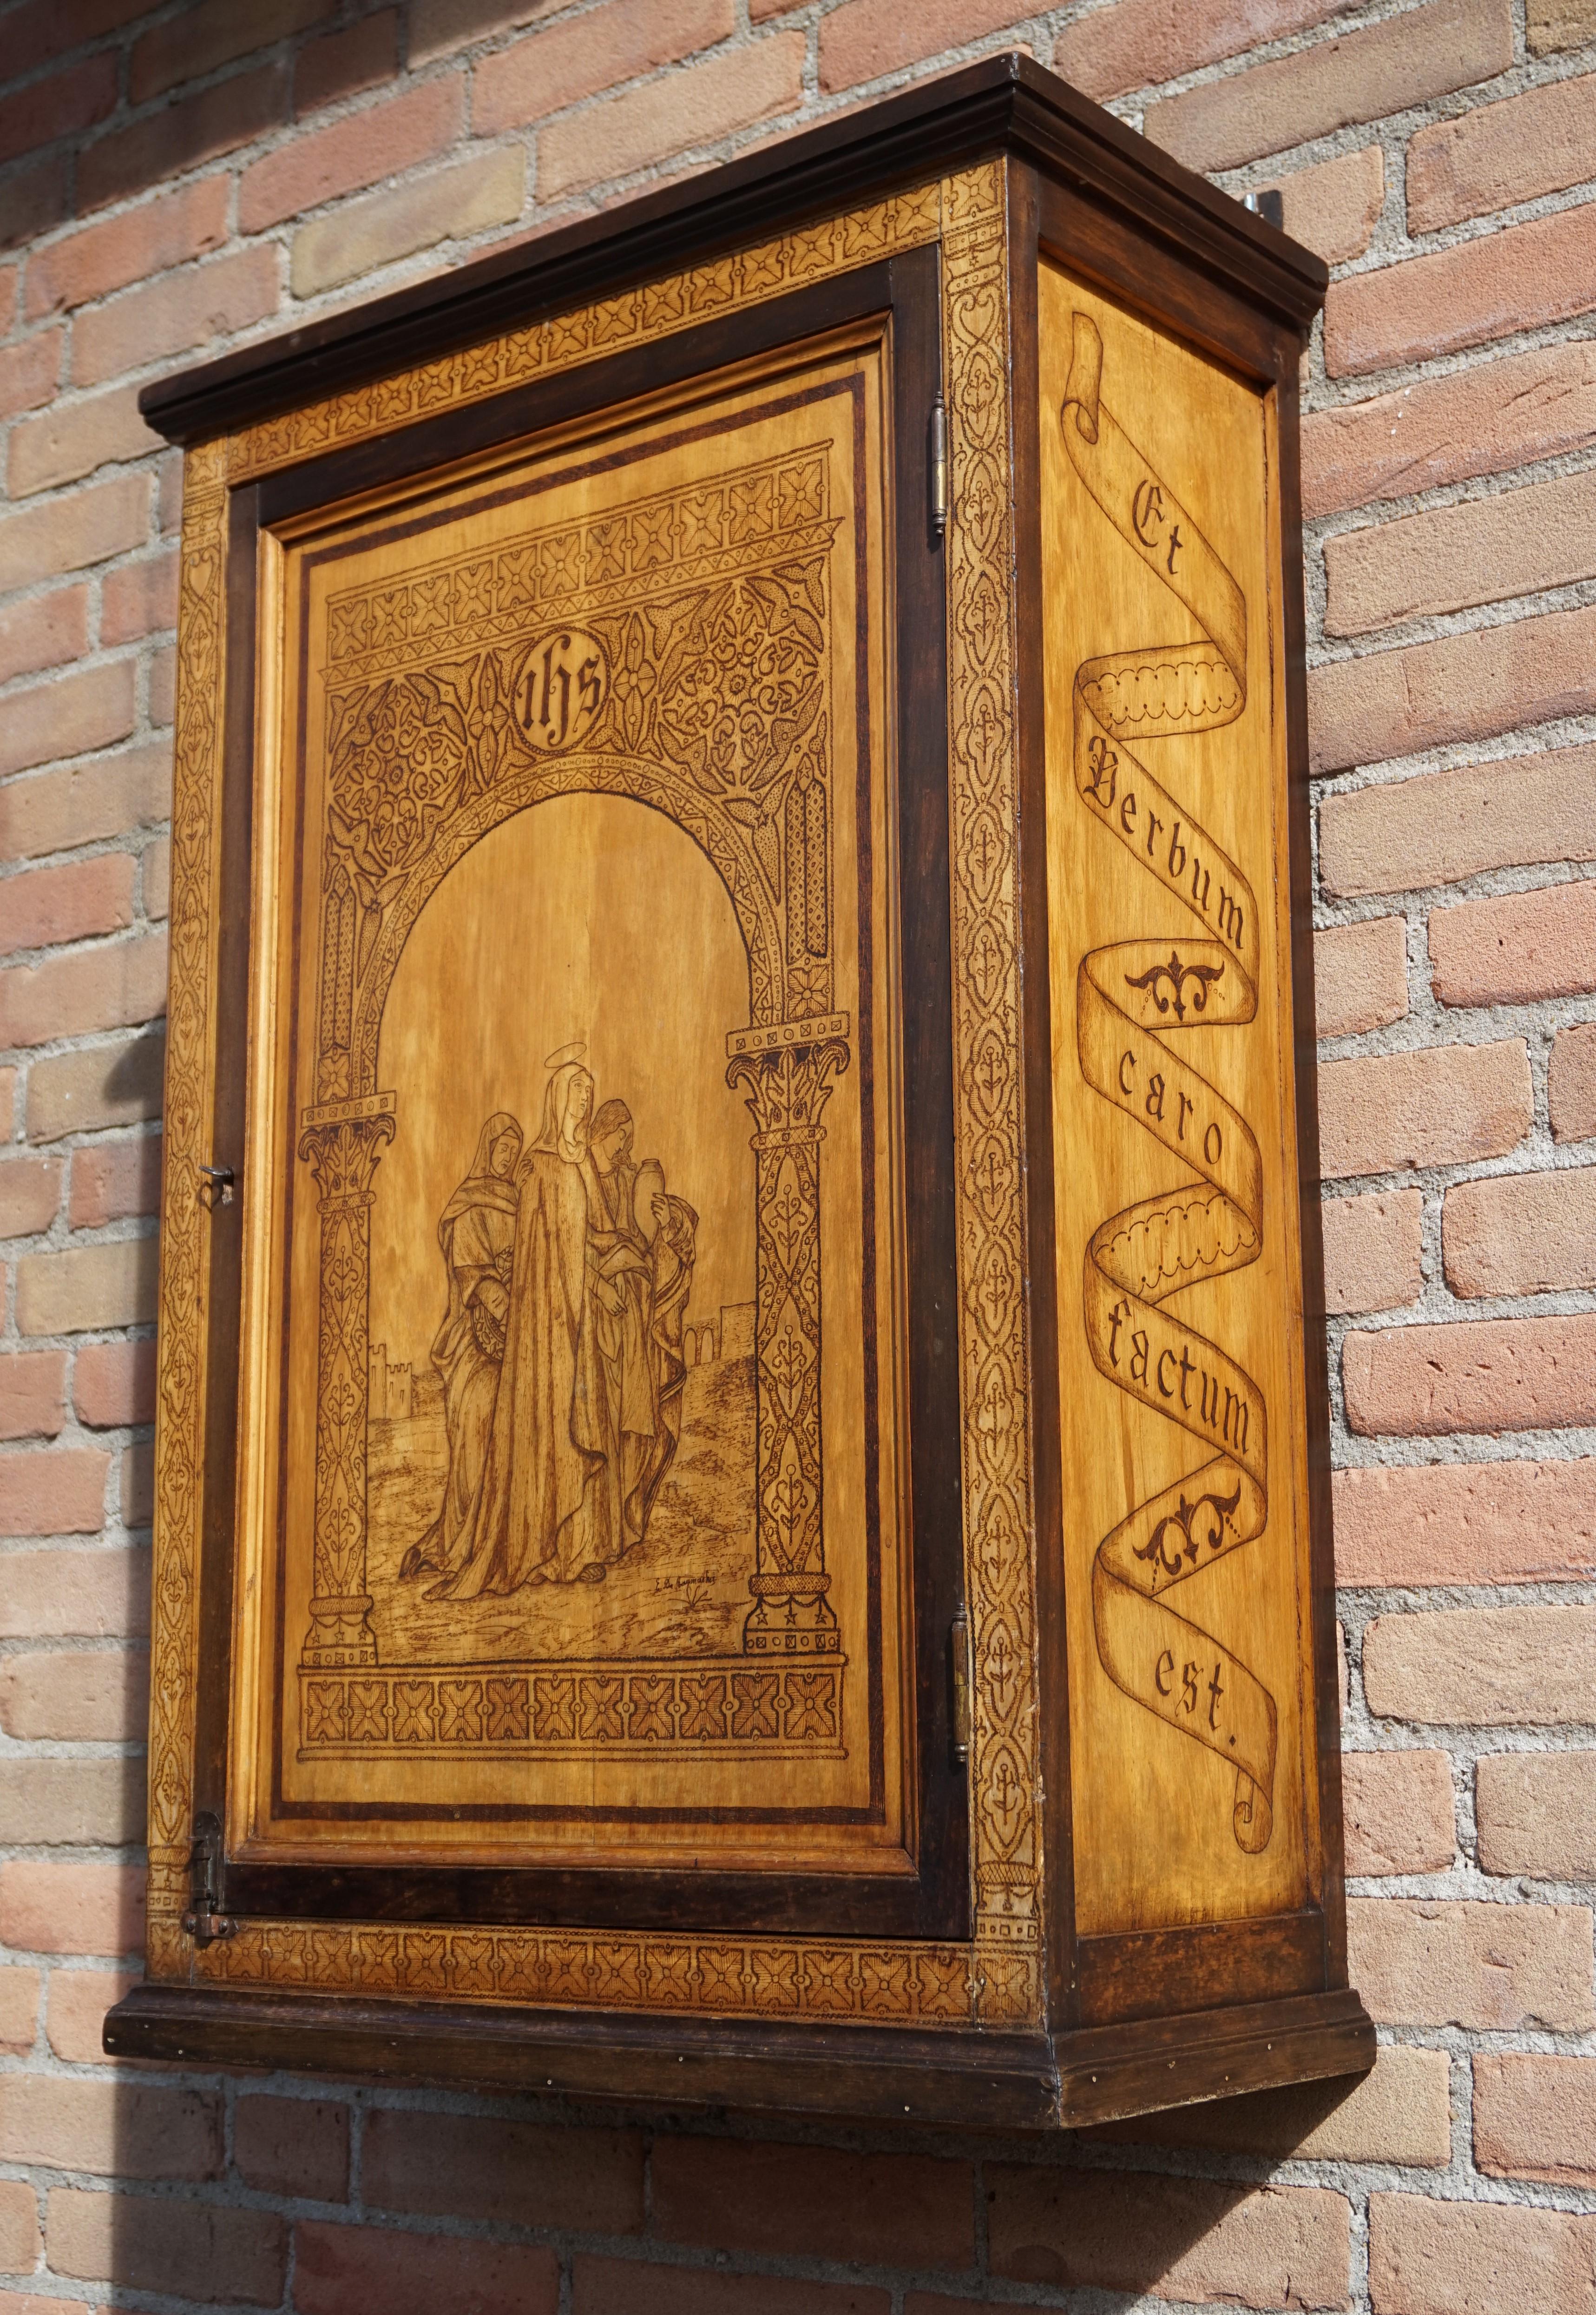 One of a kind cabinet with rare pokerwork decoration.

This multi-fuctional, practical size and all handcrafted wall cabinet is in excellent condition and it is an absolute joy to own and look at. What makes this religious cabinet/small bookcase